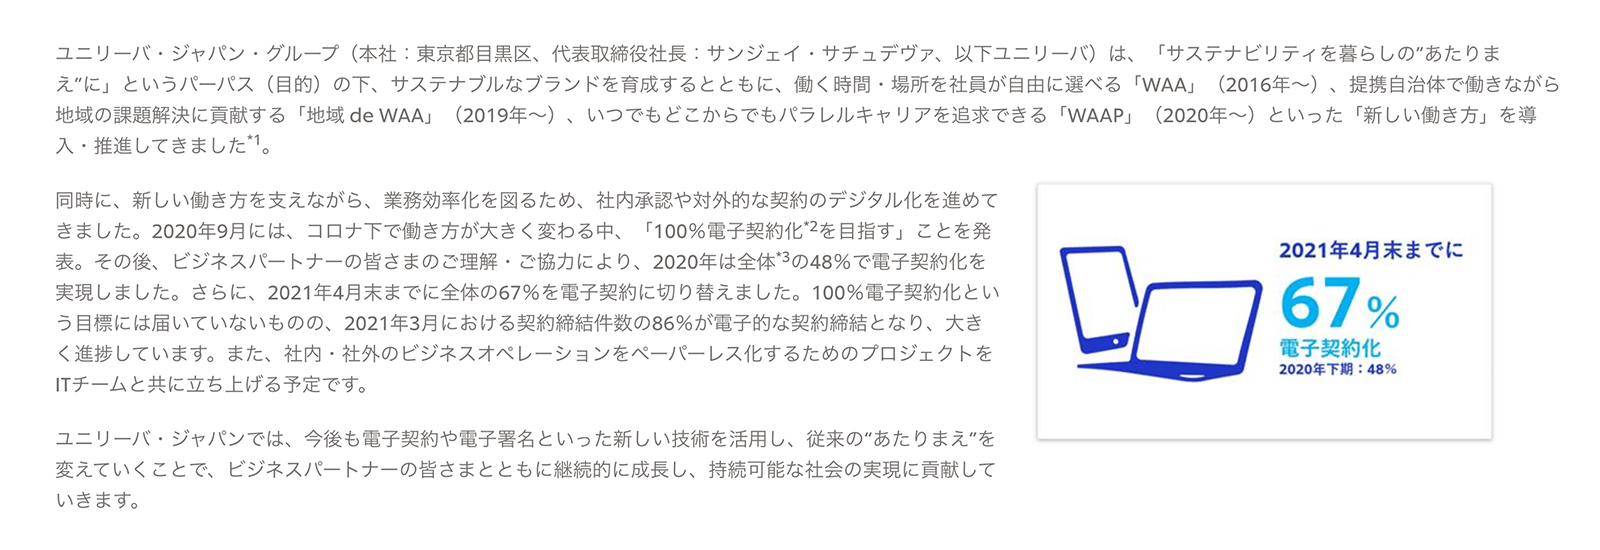 https://www.unilever.co.jp/news/press-releases/2021/unilever-japan-makes-great-strides-towards-100-electronic-contract.html　2021年6月30日最終アクセス